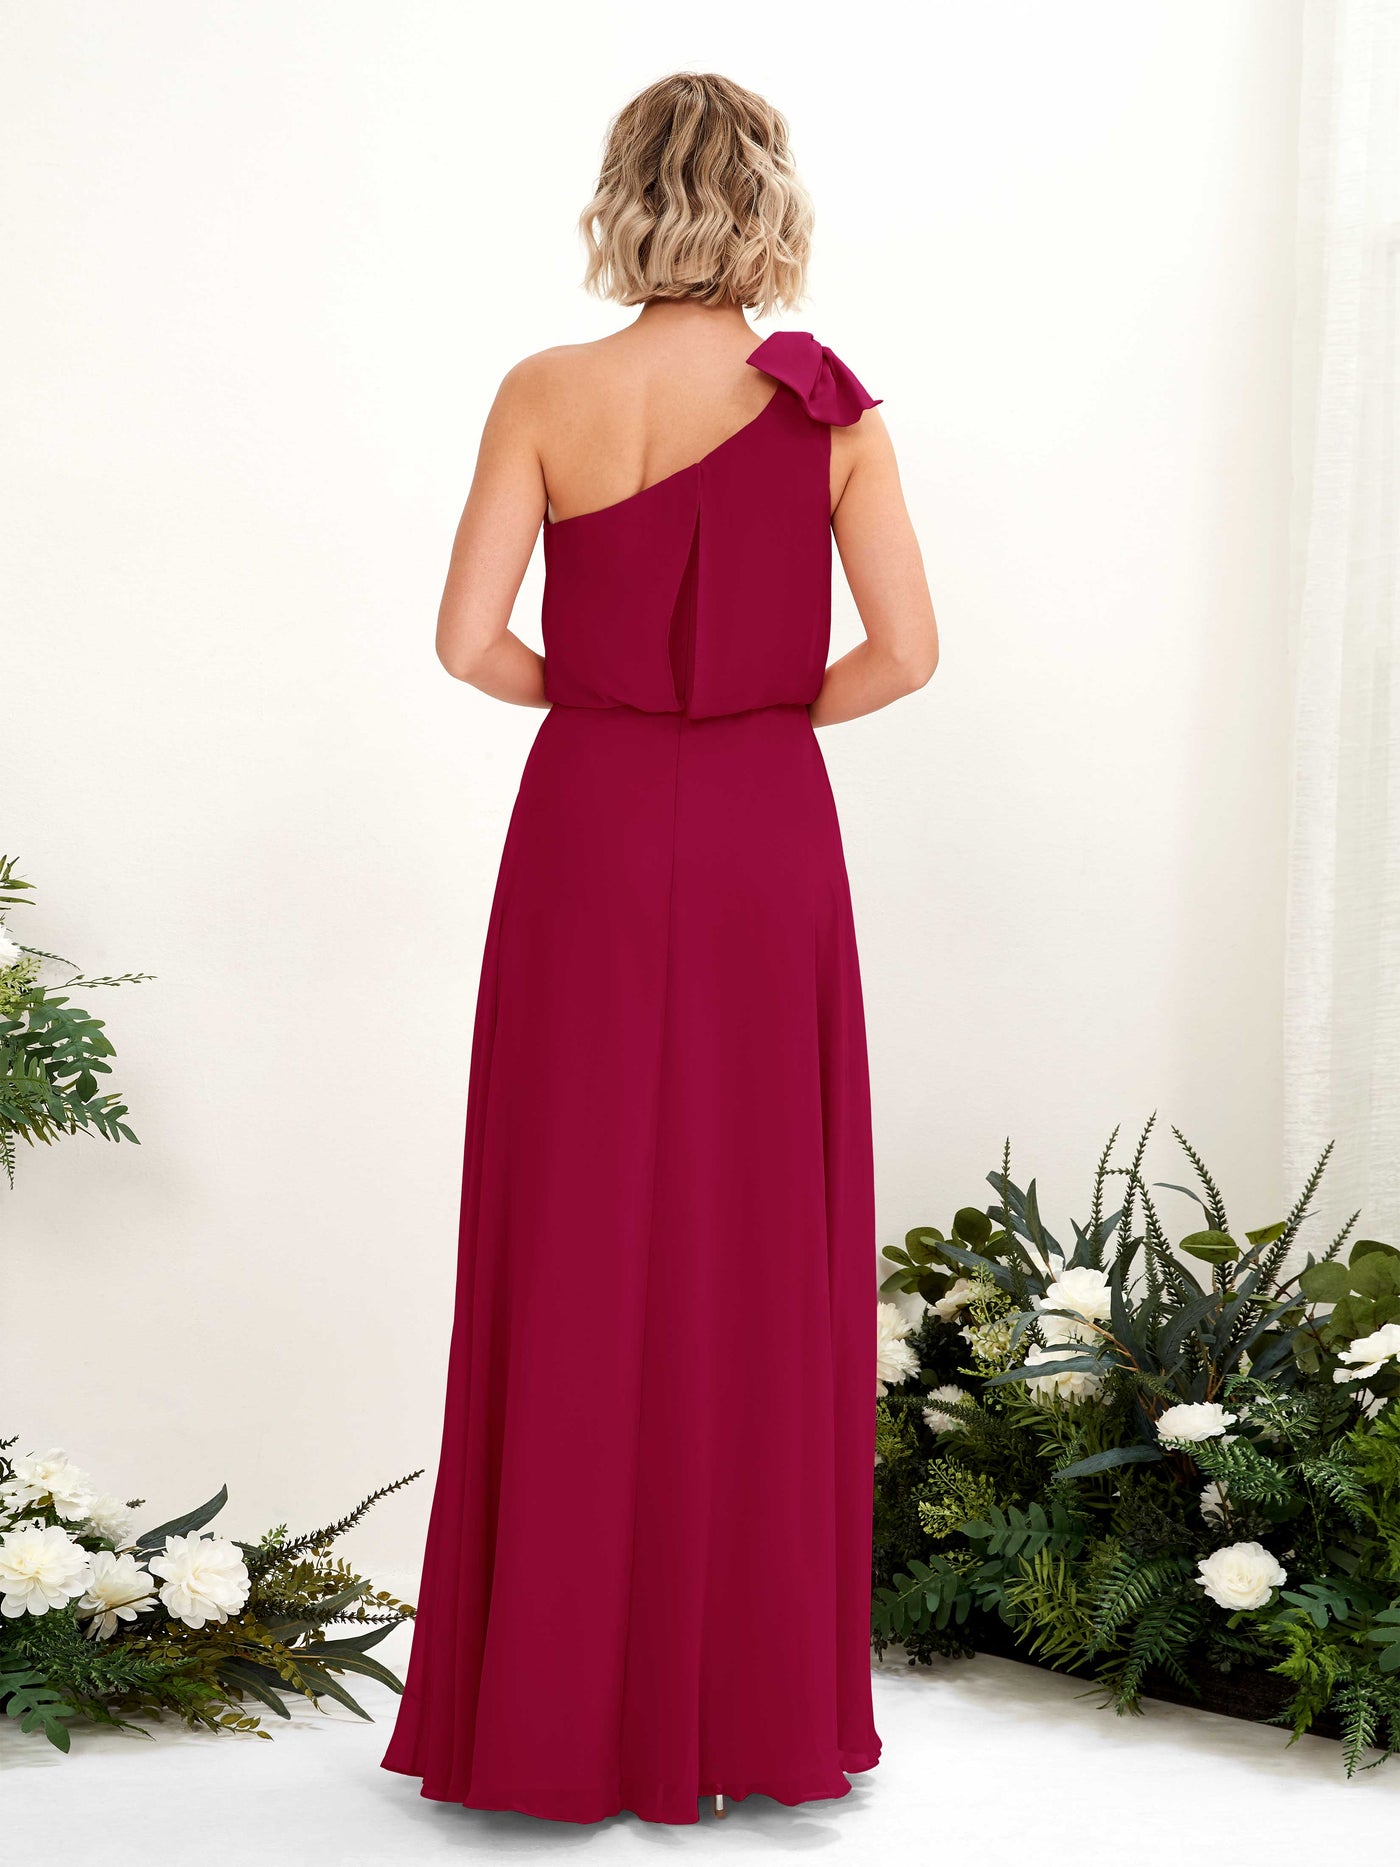 Jester Red Bridesmaid Dresses Bridesmaid Dress A-line Chiffon One Shoulder Full Length Sleeveless Wedding Party Dress (81225541)#color_jester-red